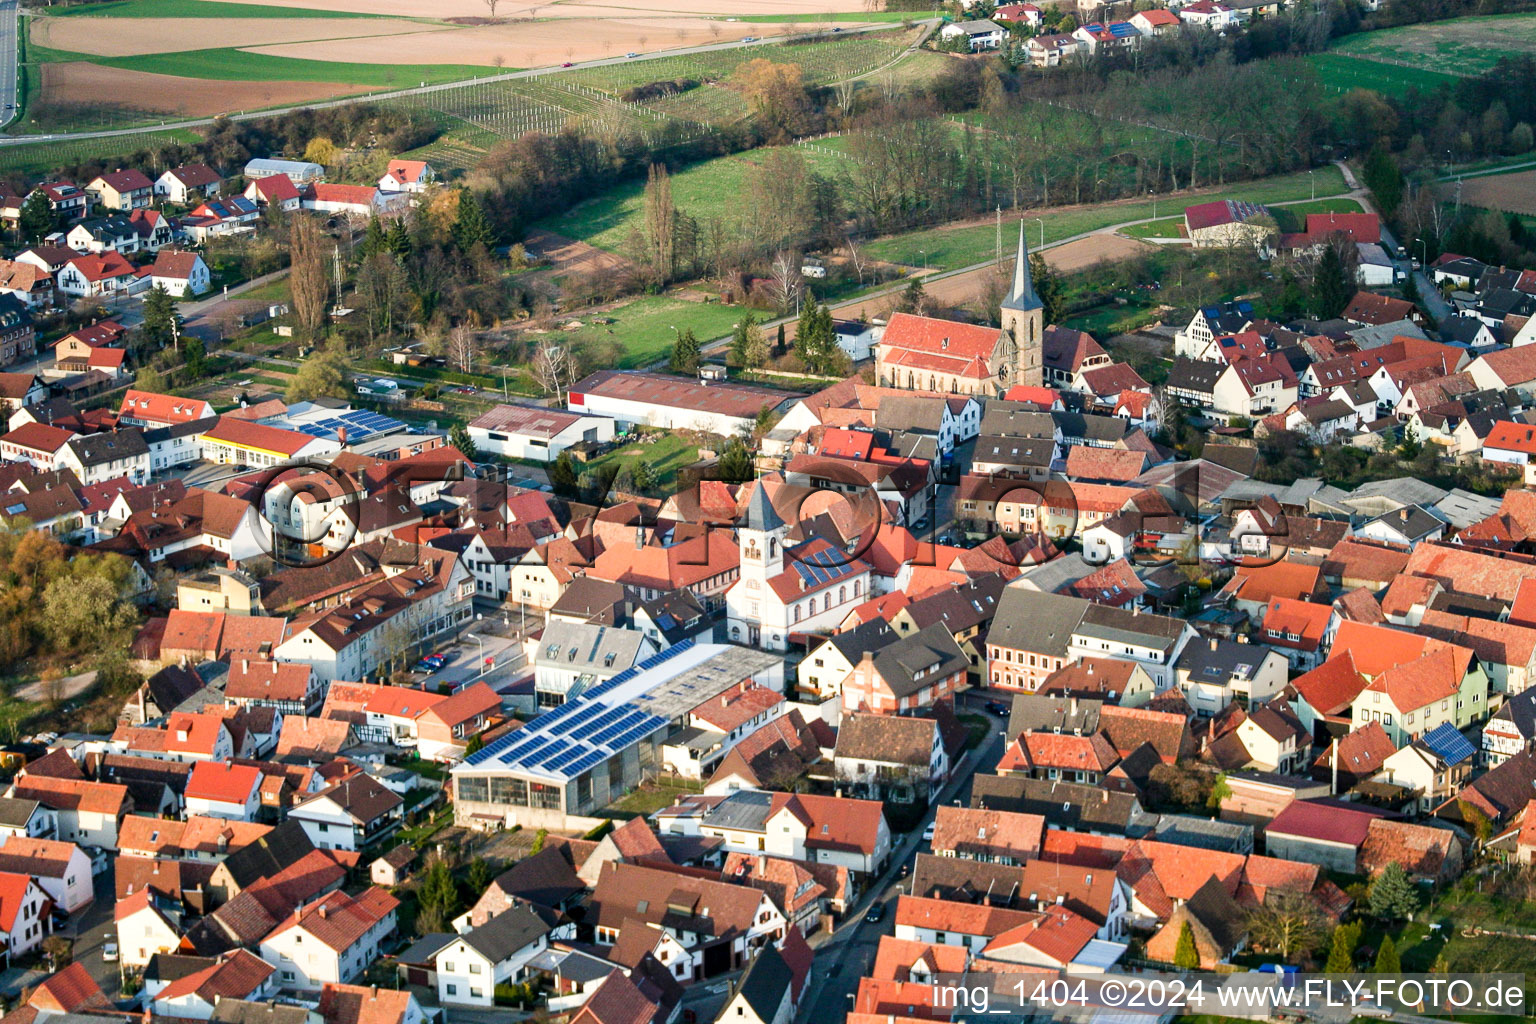 Aerial photograpy of Town View of the streets and houses of the residential areas in the district Ingenheim in Billigheim-Ingenheim in the state Rhineland-Palatinate